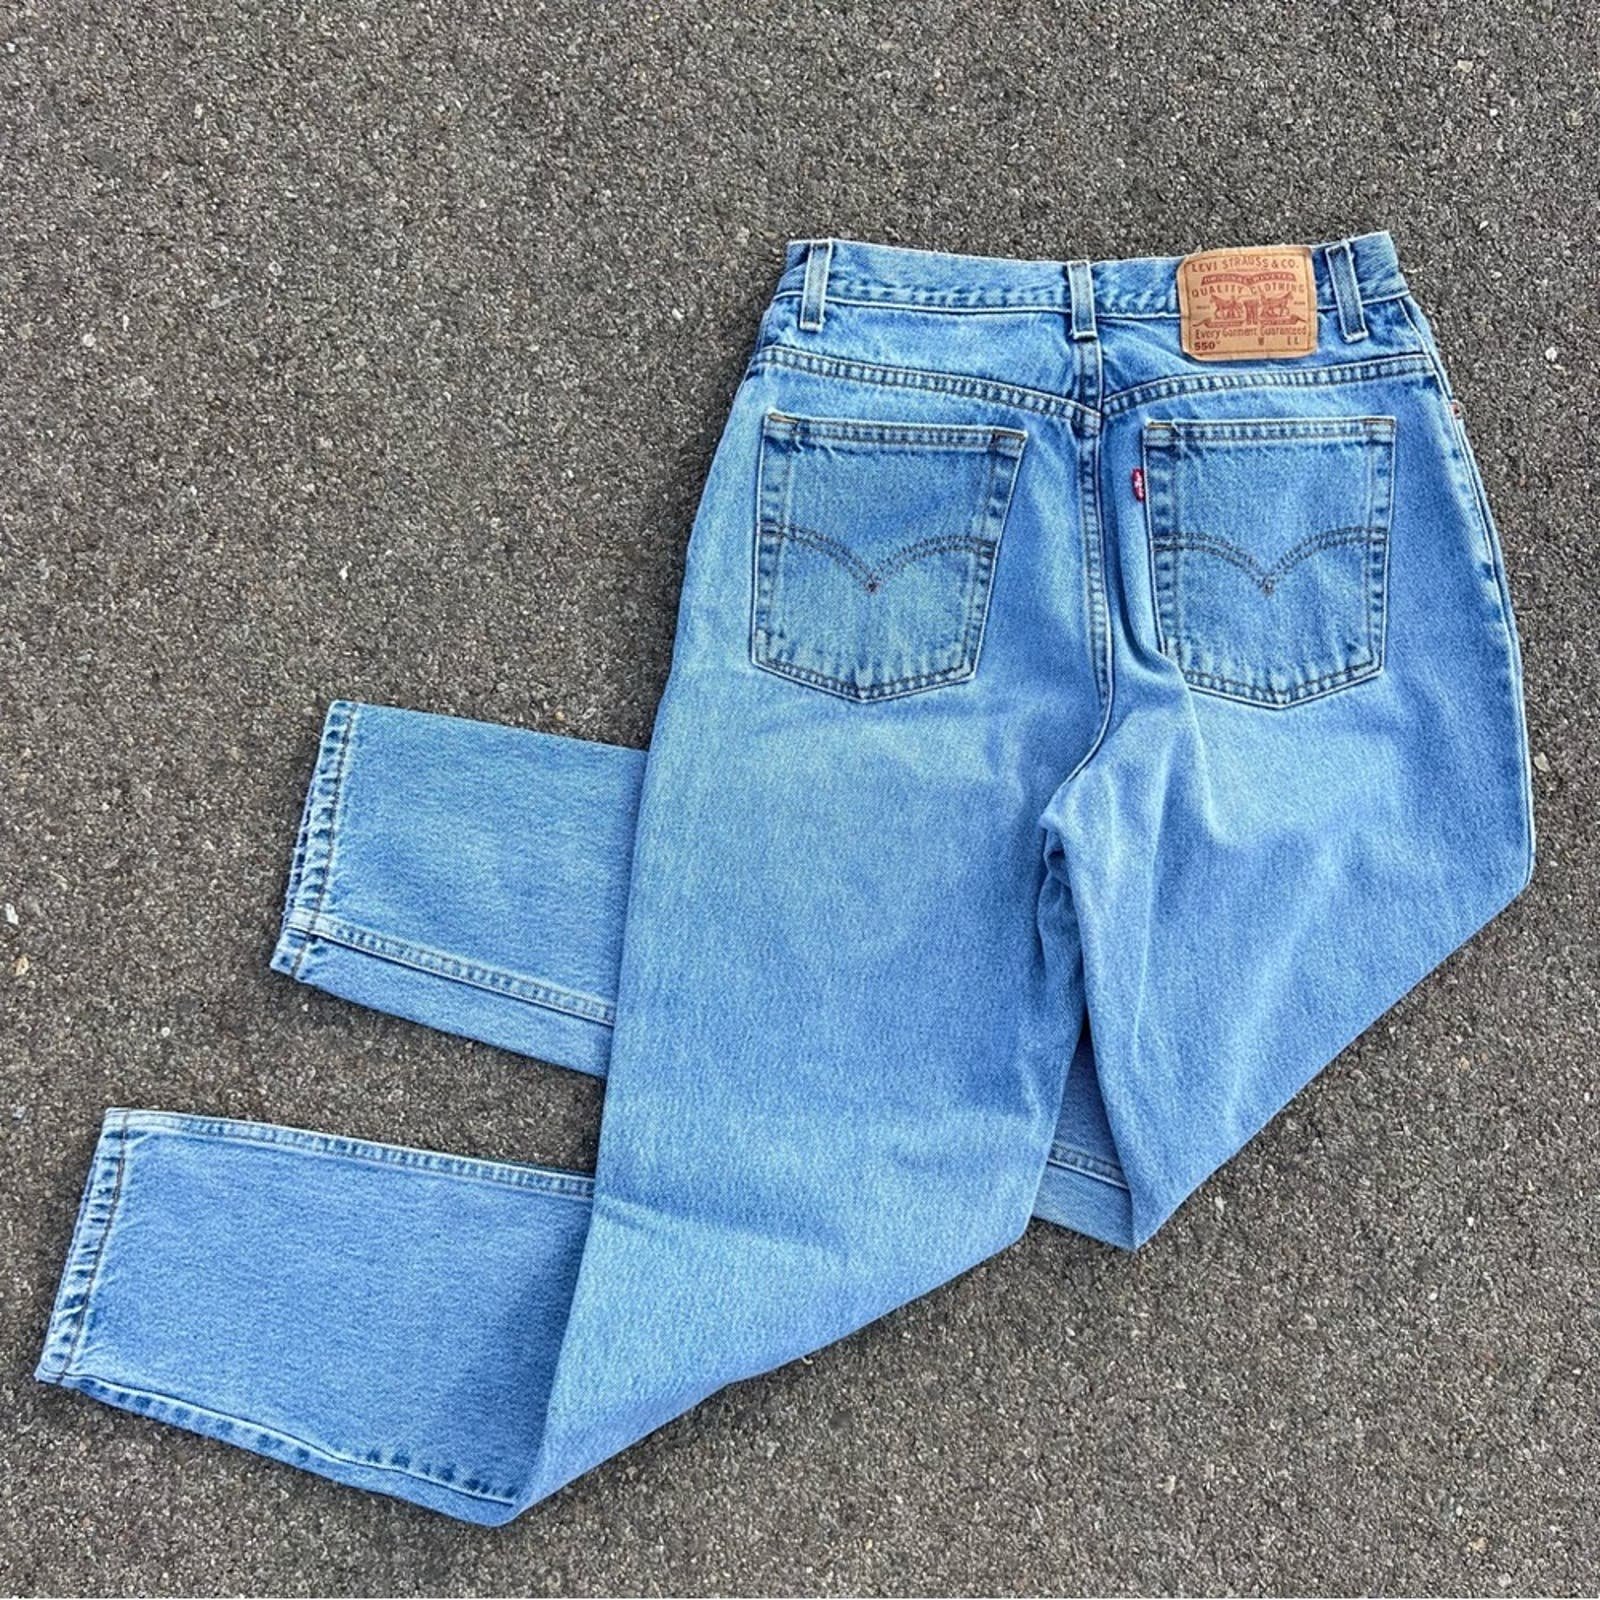 floor price Vintage 90s Levi’s 550 relaxed fit tapered leg mom jeans Women’s 12 Reg L j6PVWSyqX online store